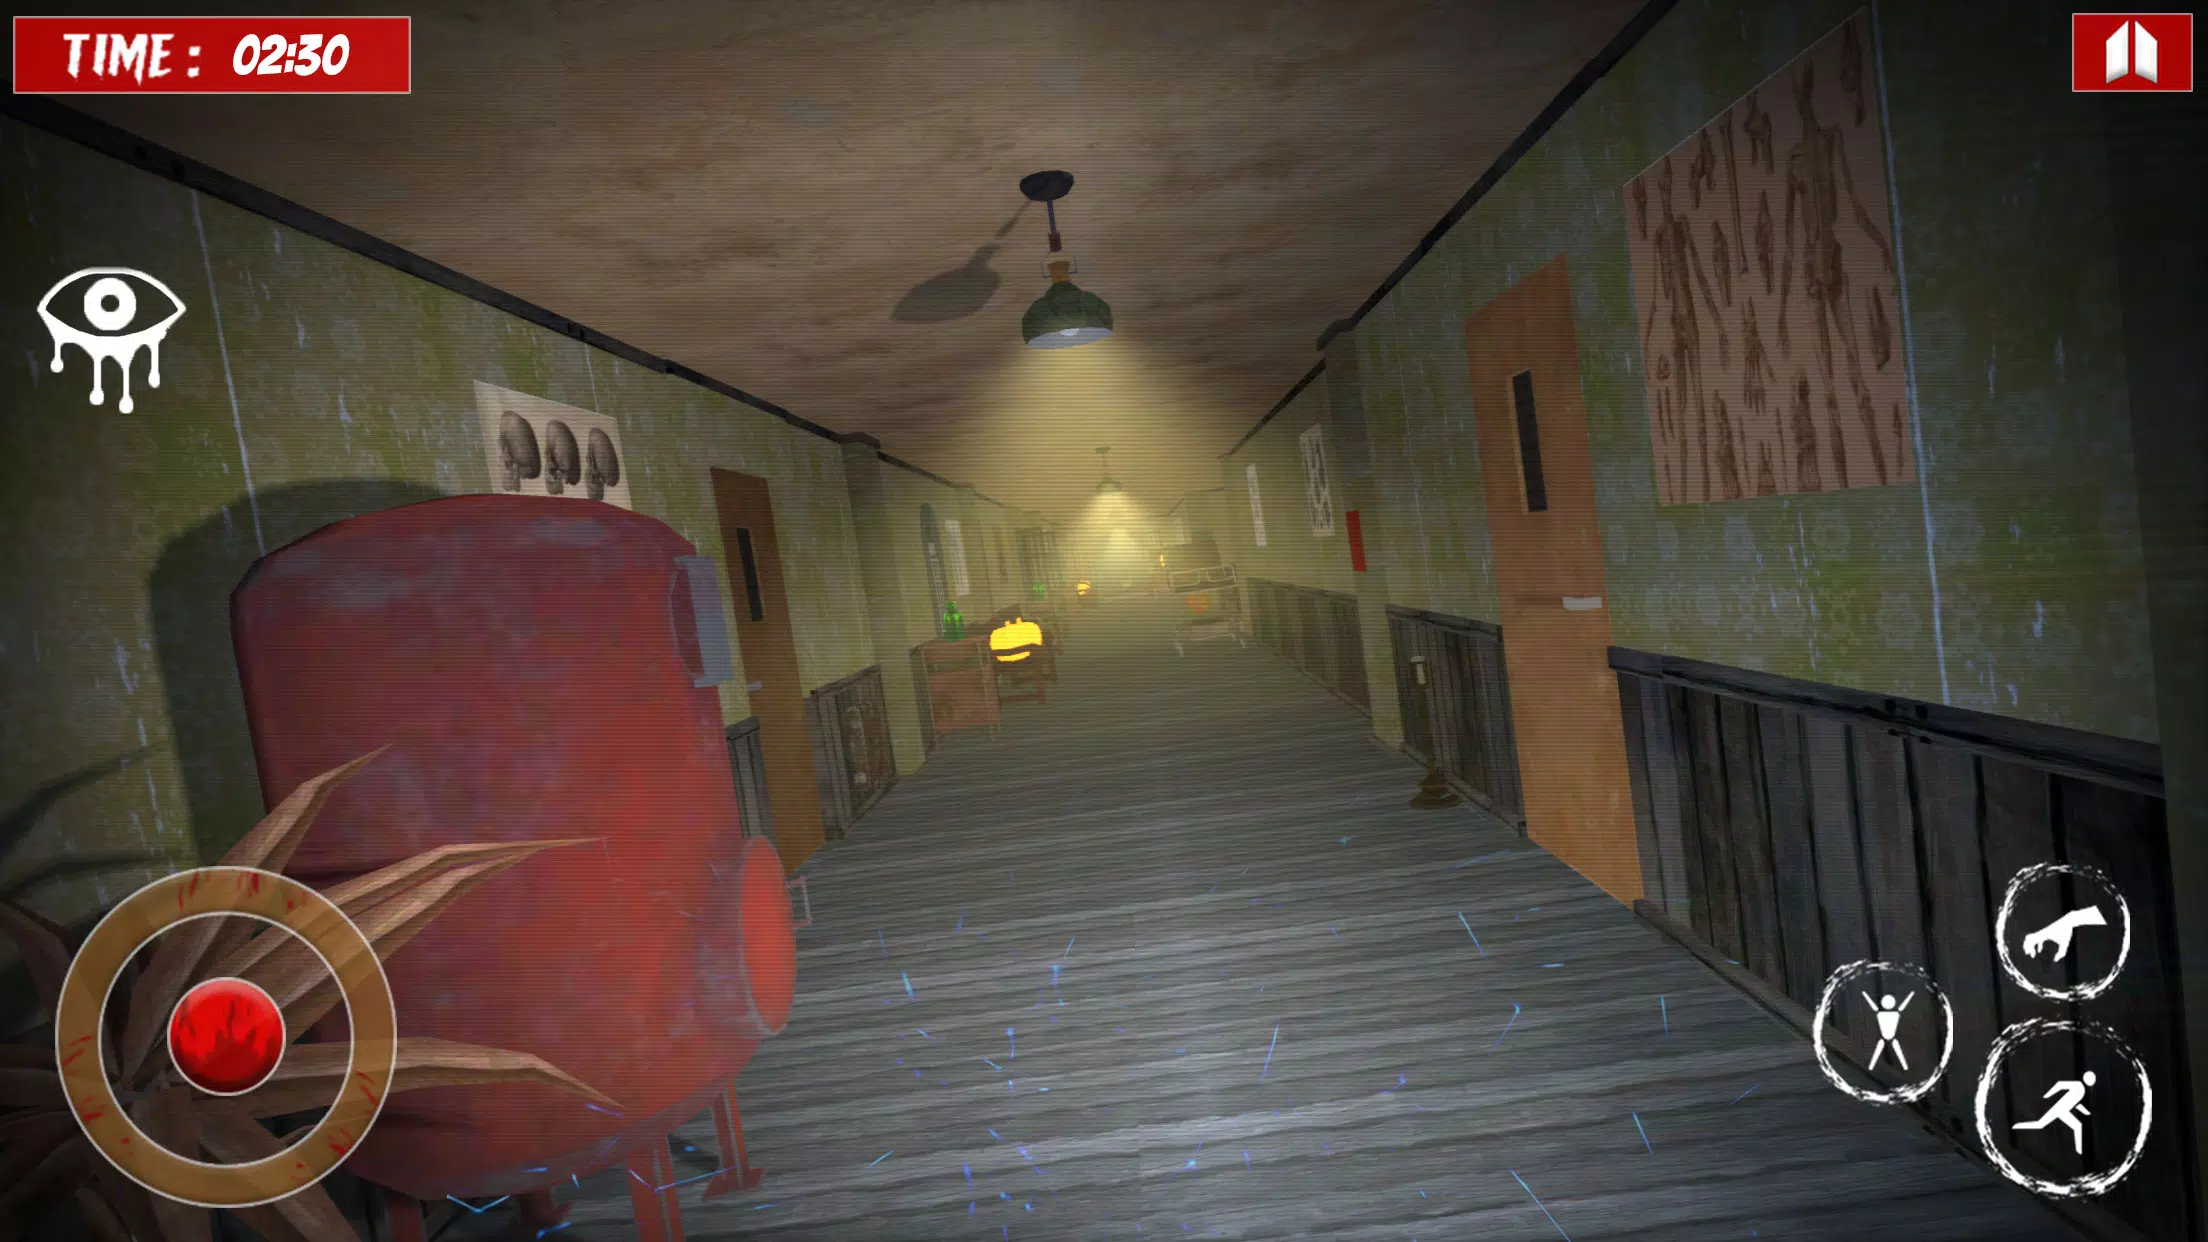 black eyes the horror APK for Android Download